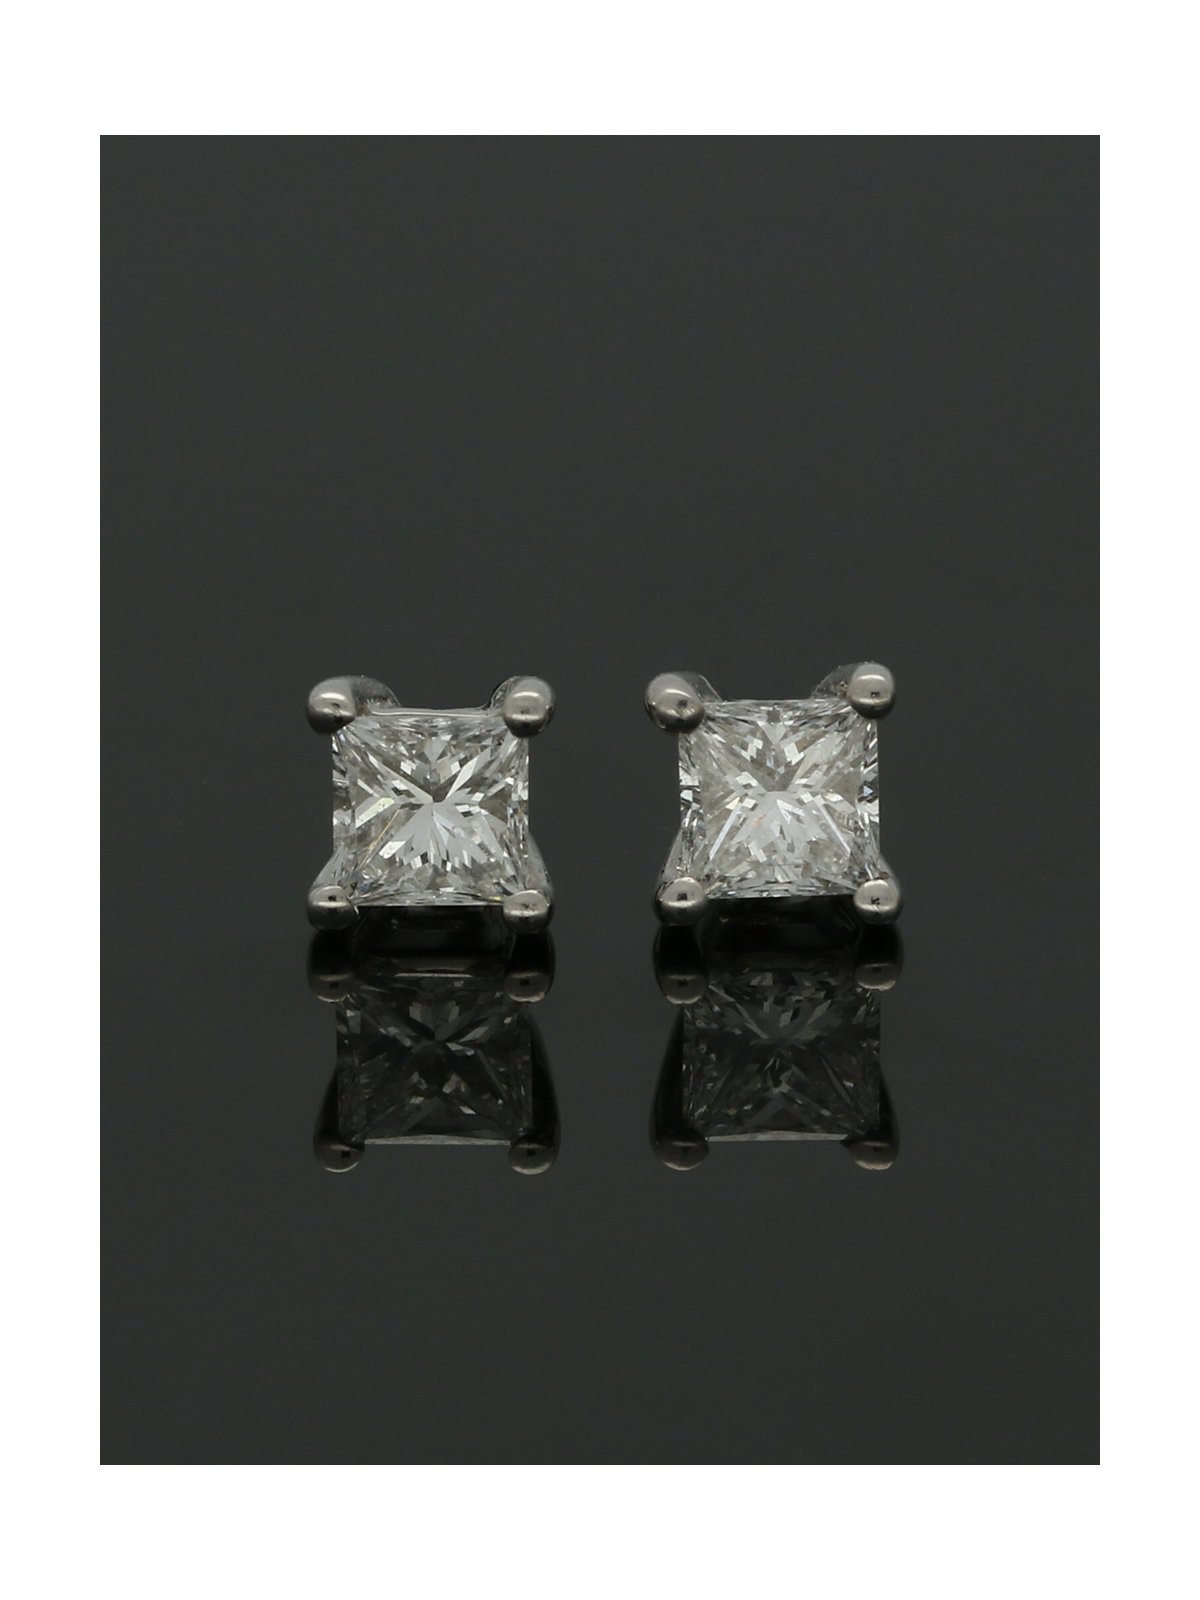 Diamond Solitaire Stud Earrings "The Grace Collection" 0.40ct Princess Cut in 18ct White Gold